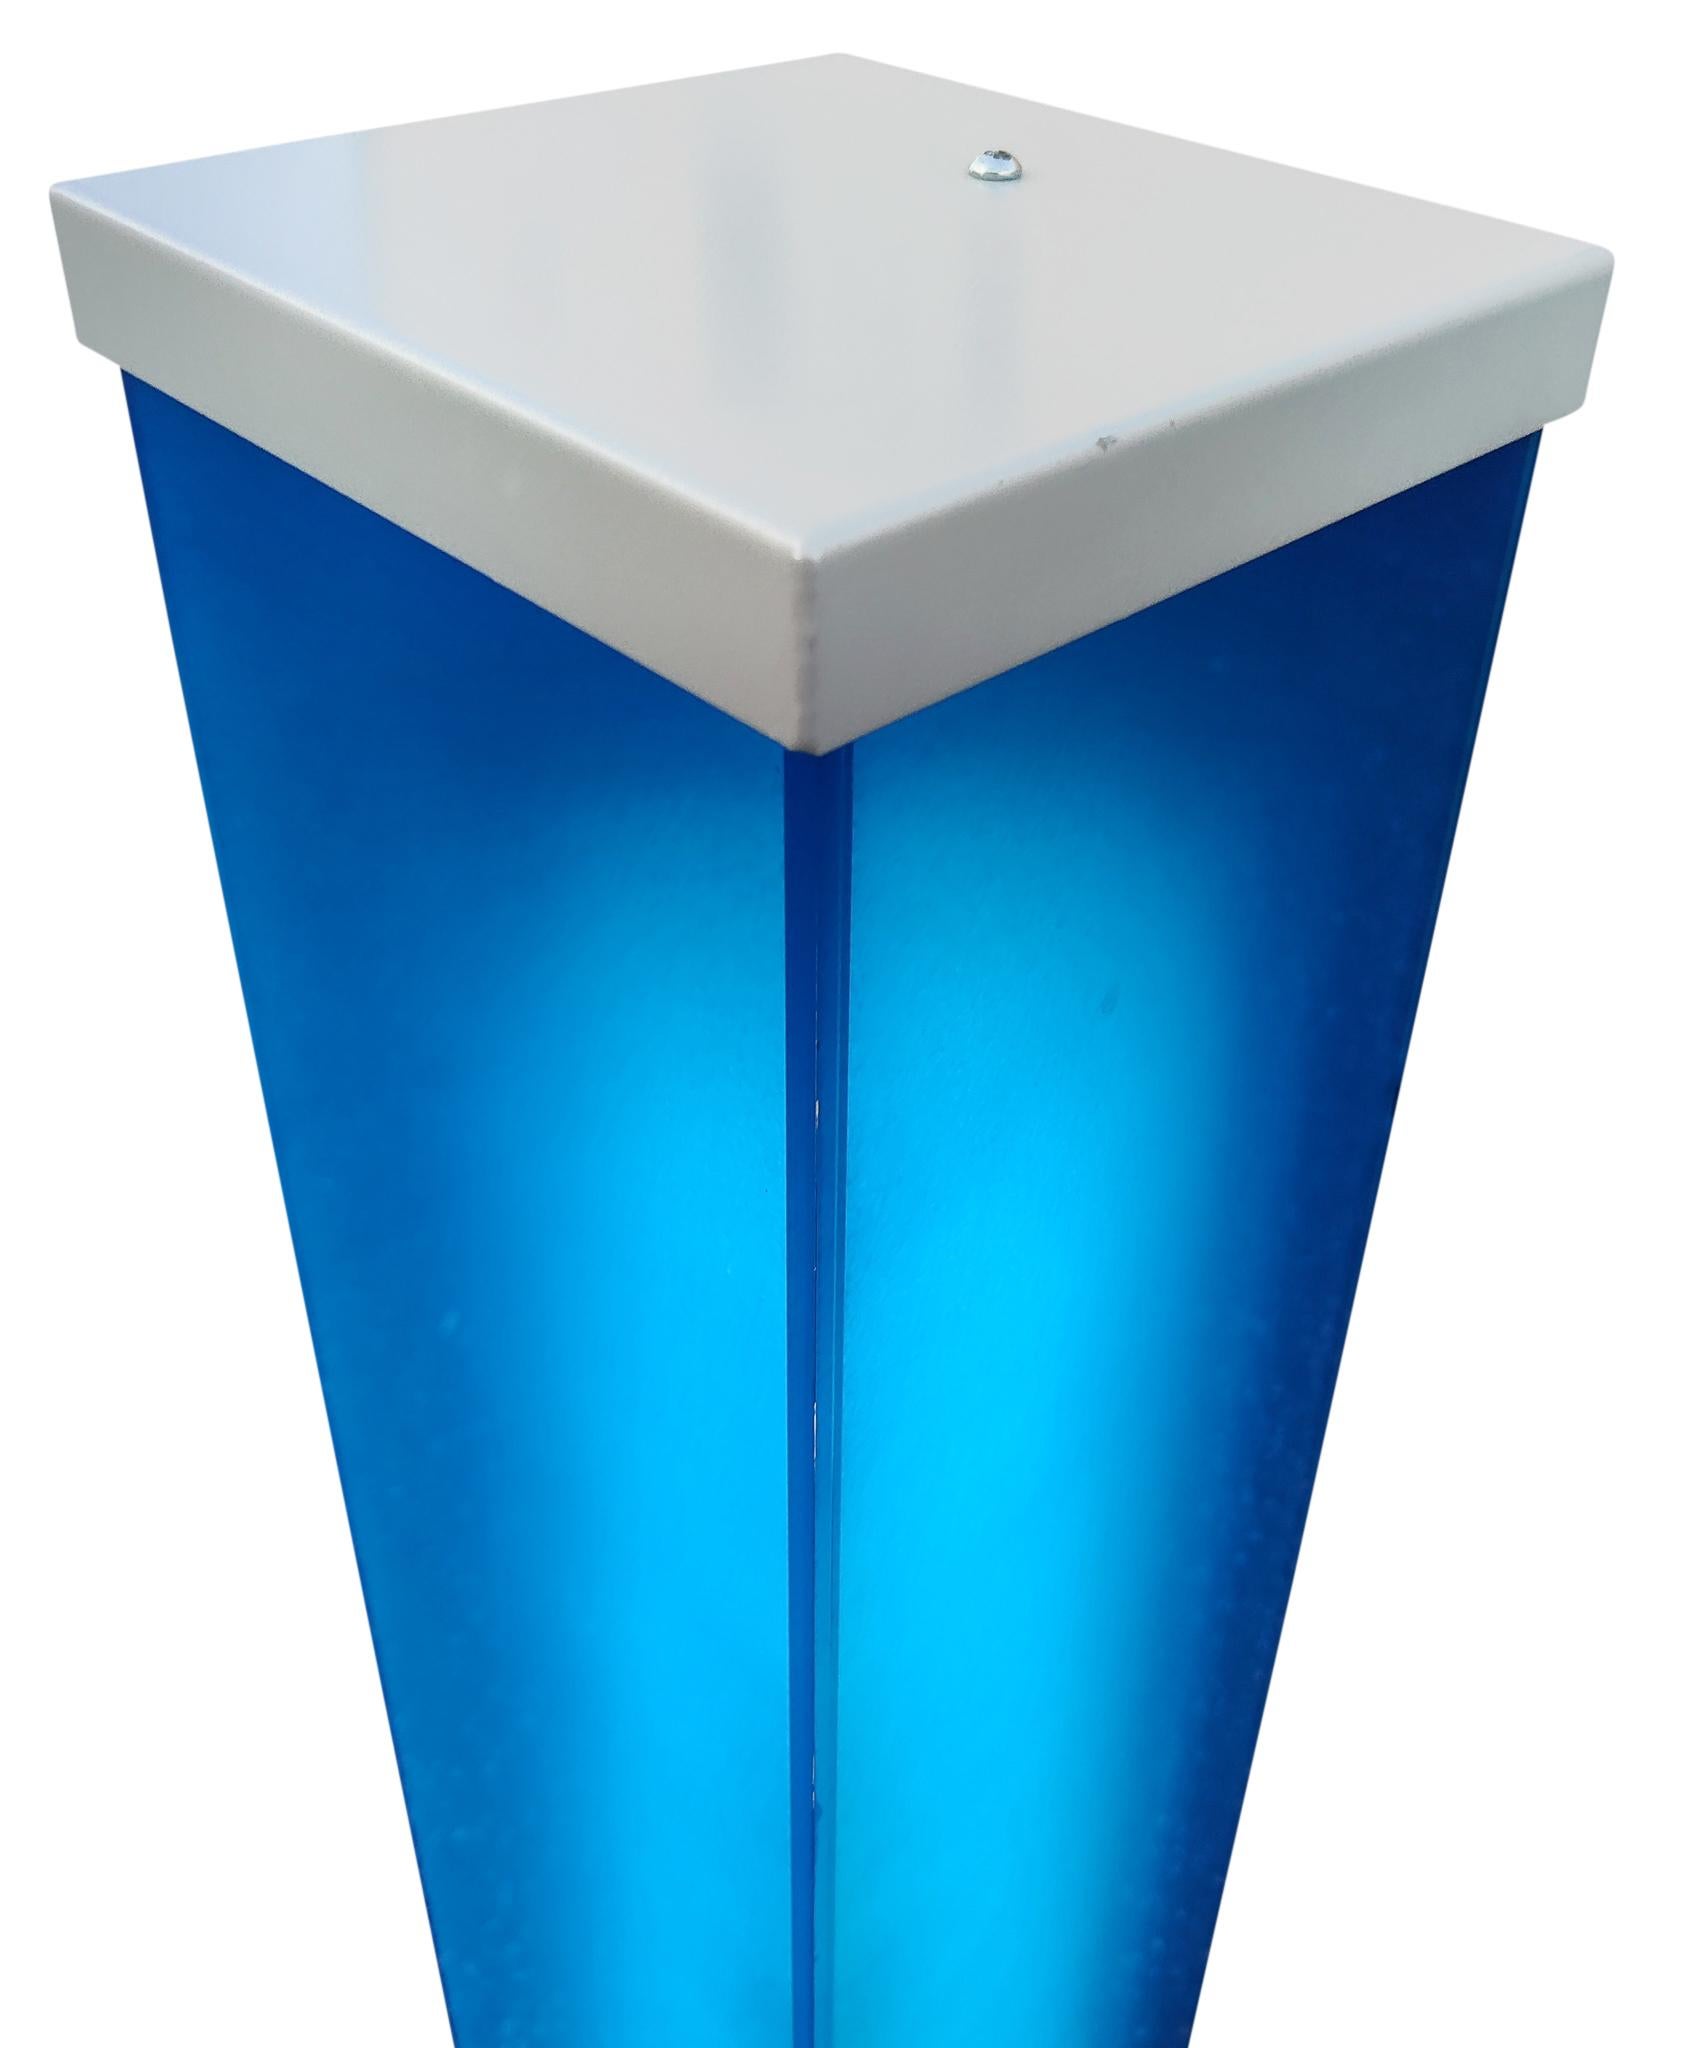 Contemporary Post-Modern Sculptural Mood Lighting Tower Blue Glass Floor Lamp by Curvet USA For Sale